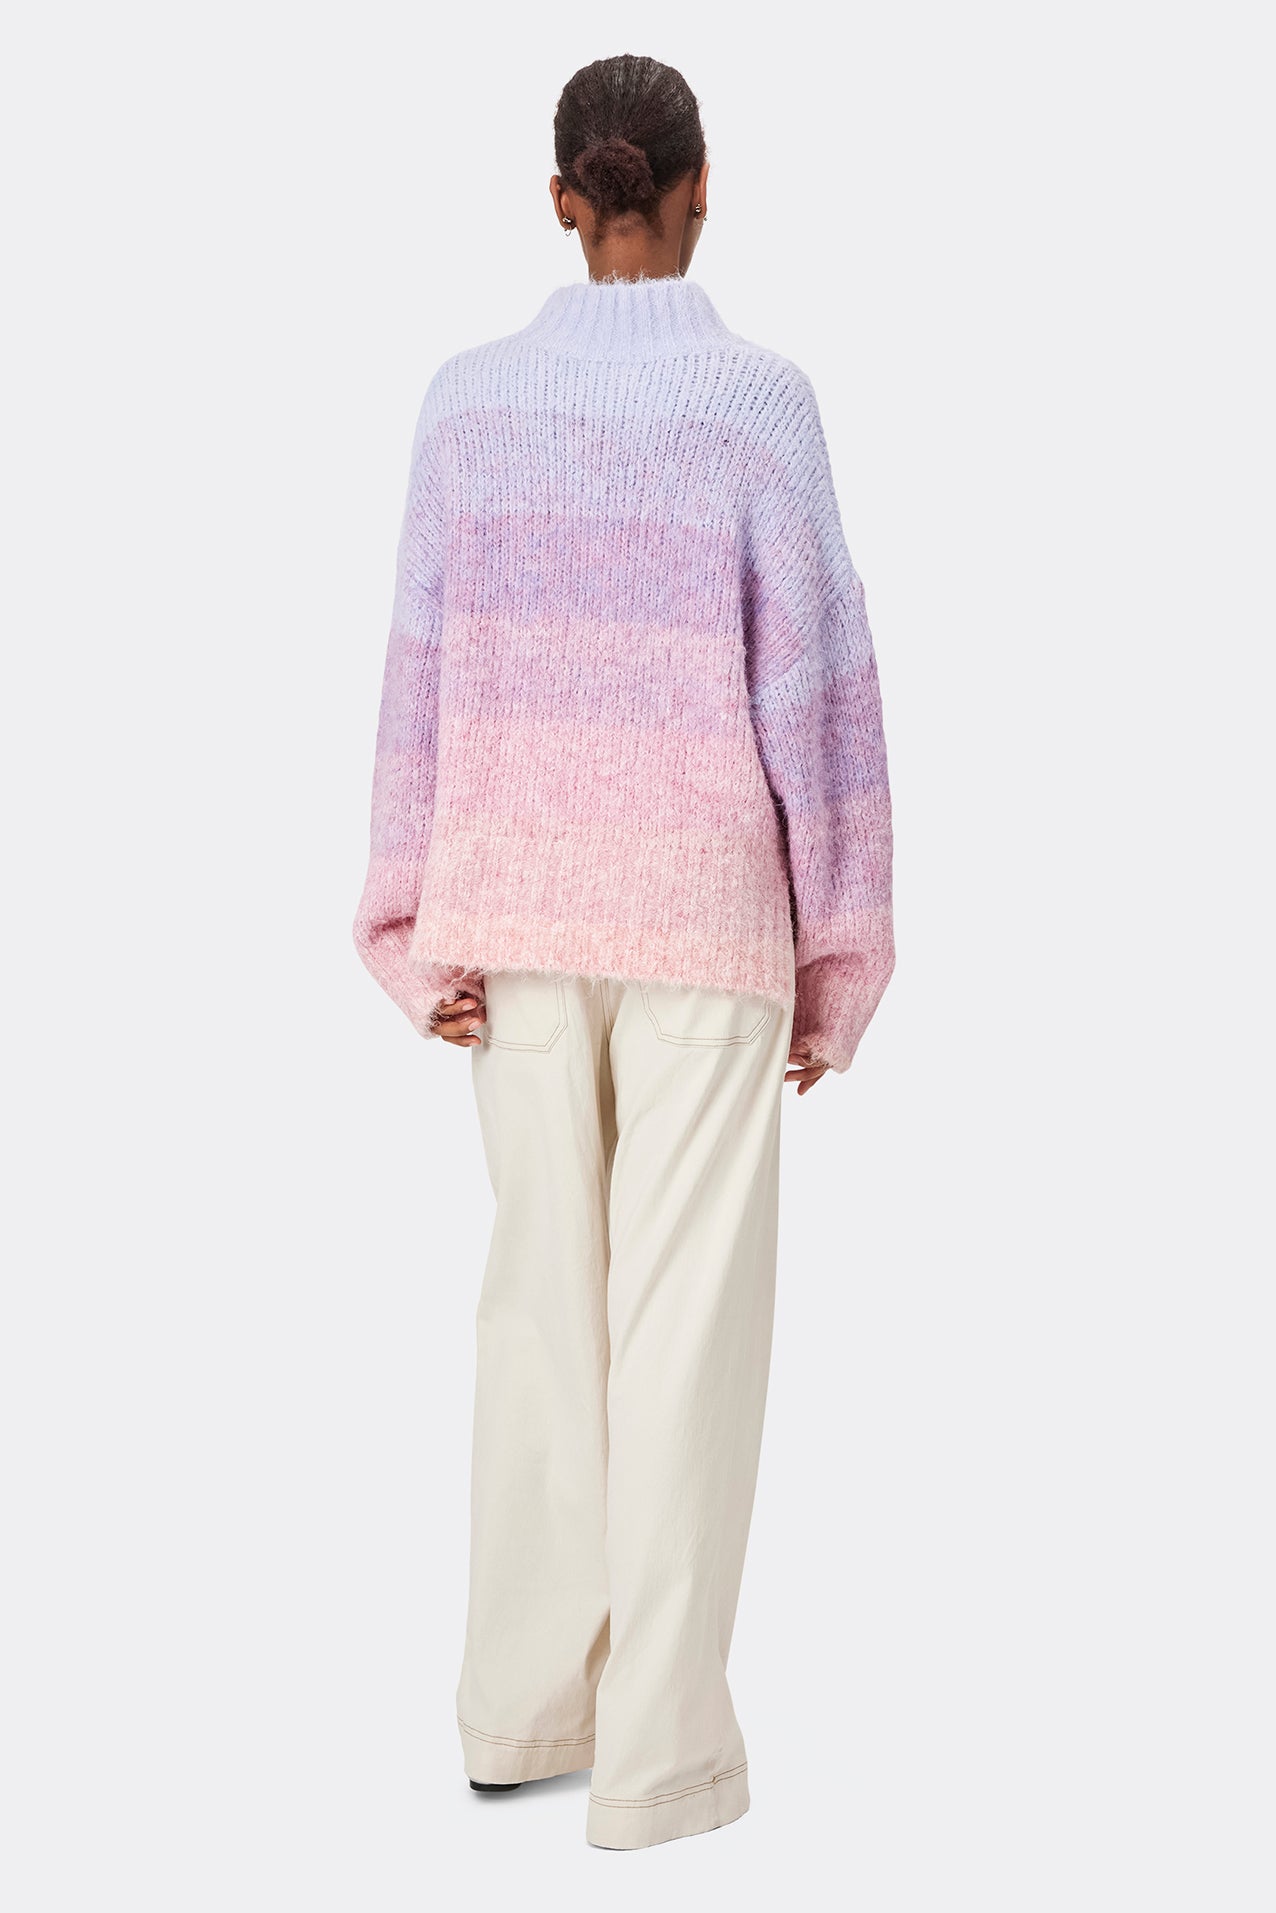 Lollys Laundry Mille Knit - Pink